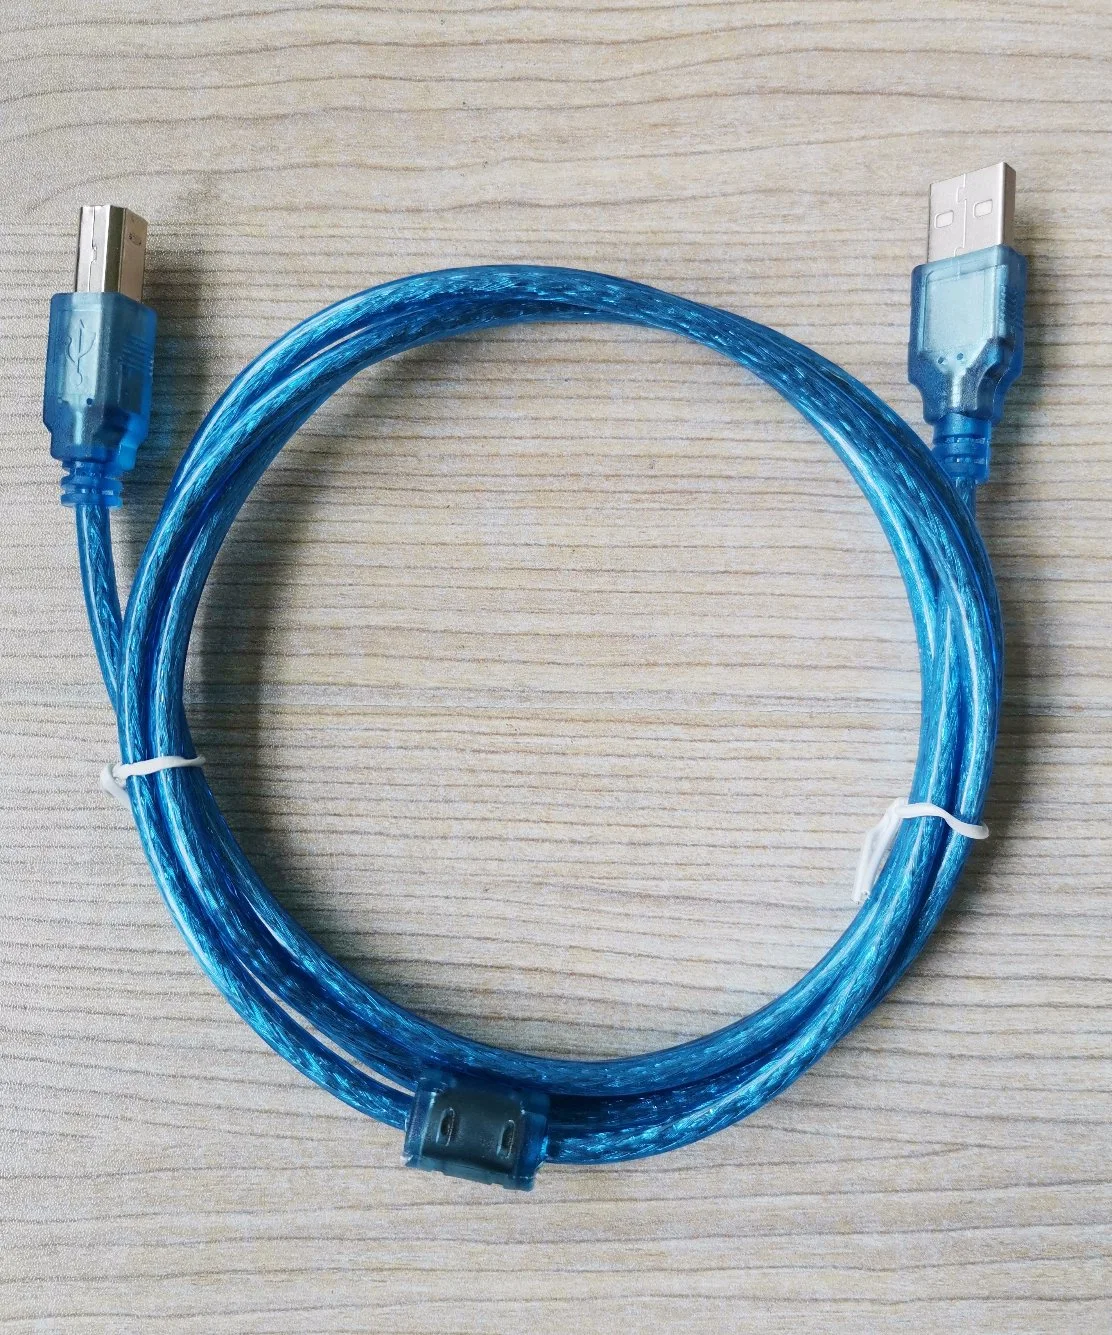 Transparent USB2.0 Cable Am to Bm USB Print Shielded Printer Cable